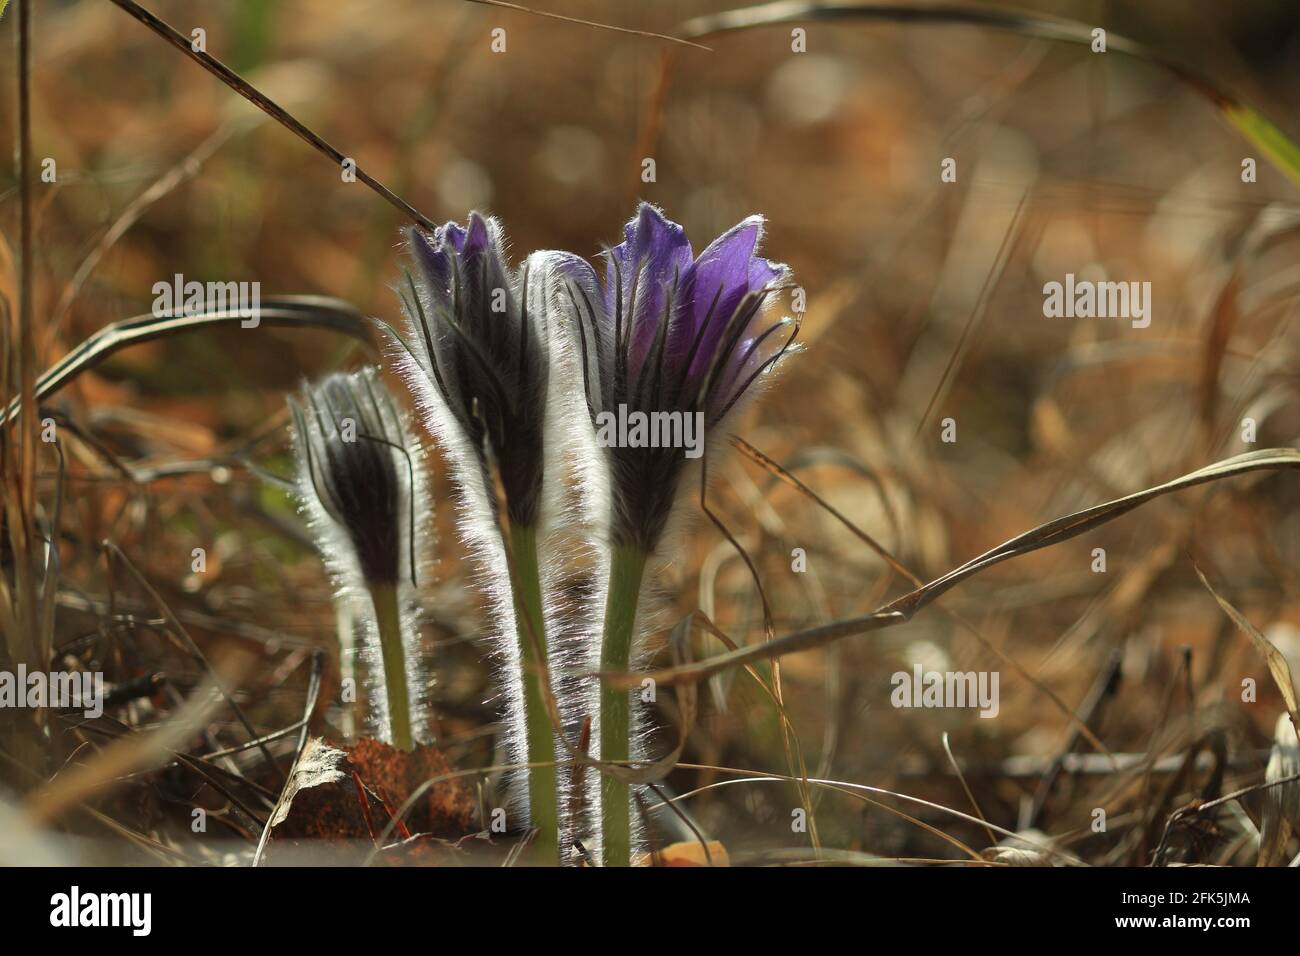 Pulsatilla patens, eastern pasqueflower, spreading anemone. Blooming buds of purple spring flowers in small villi in the middle of dry red grass Stock Photo